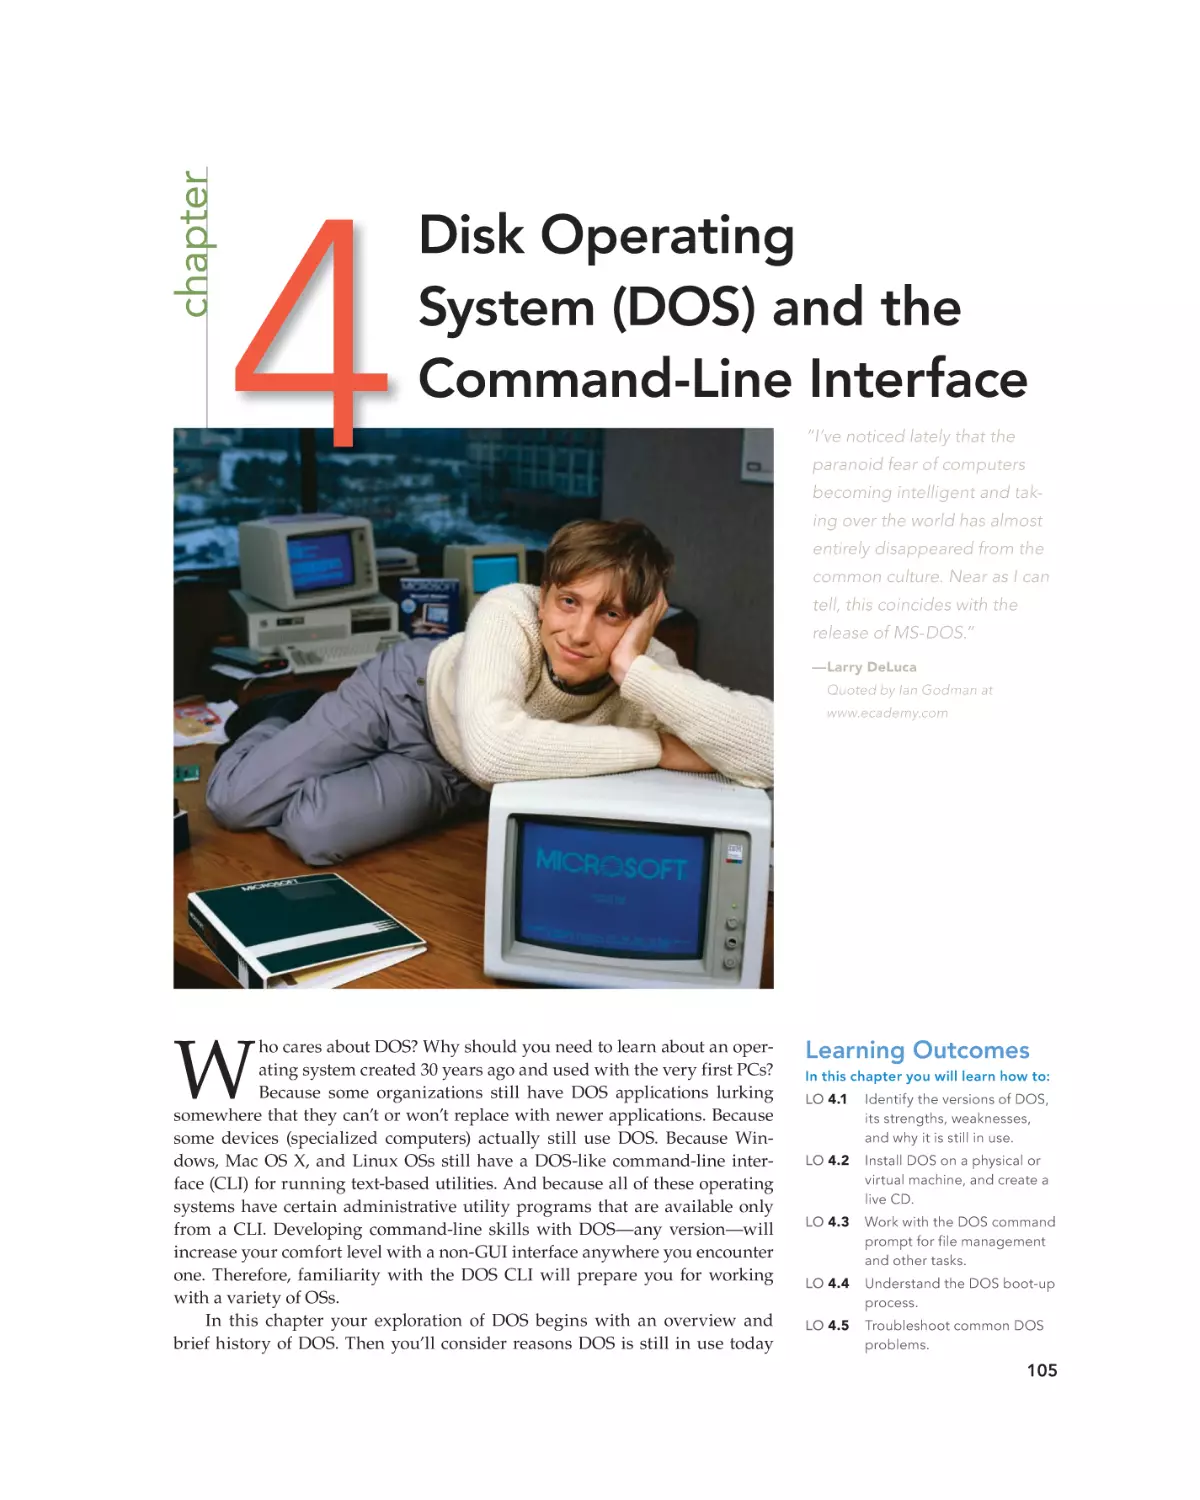 4 Disk Operating System (DOS) and the Command-Line Interface